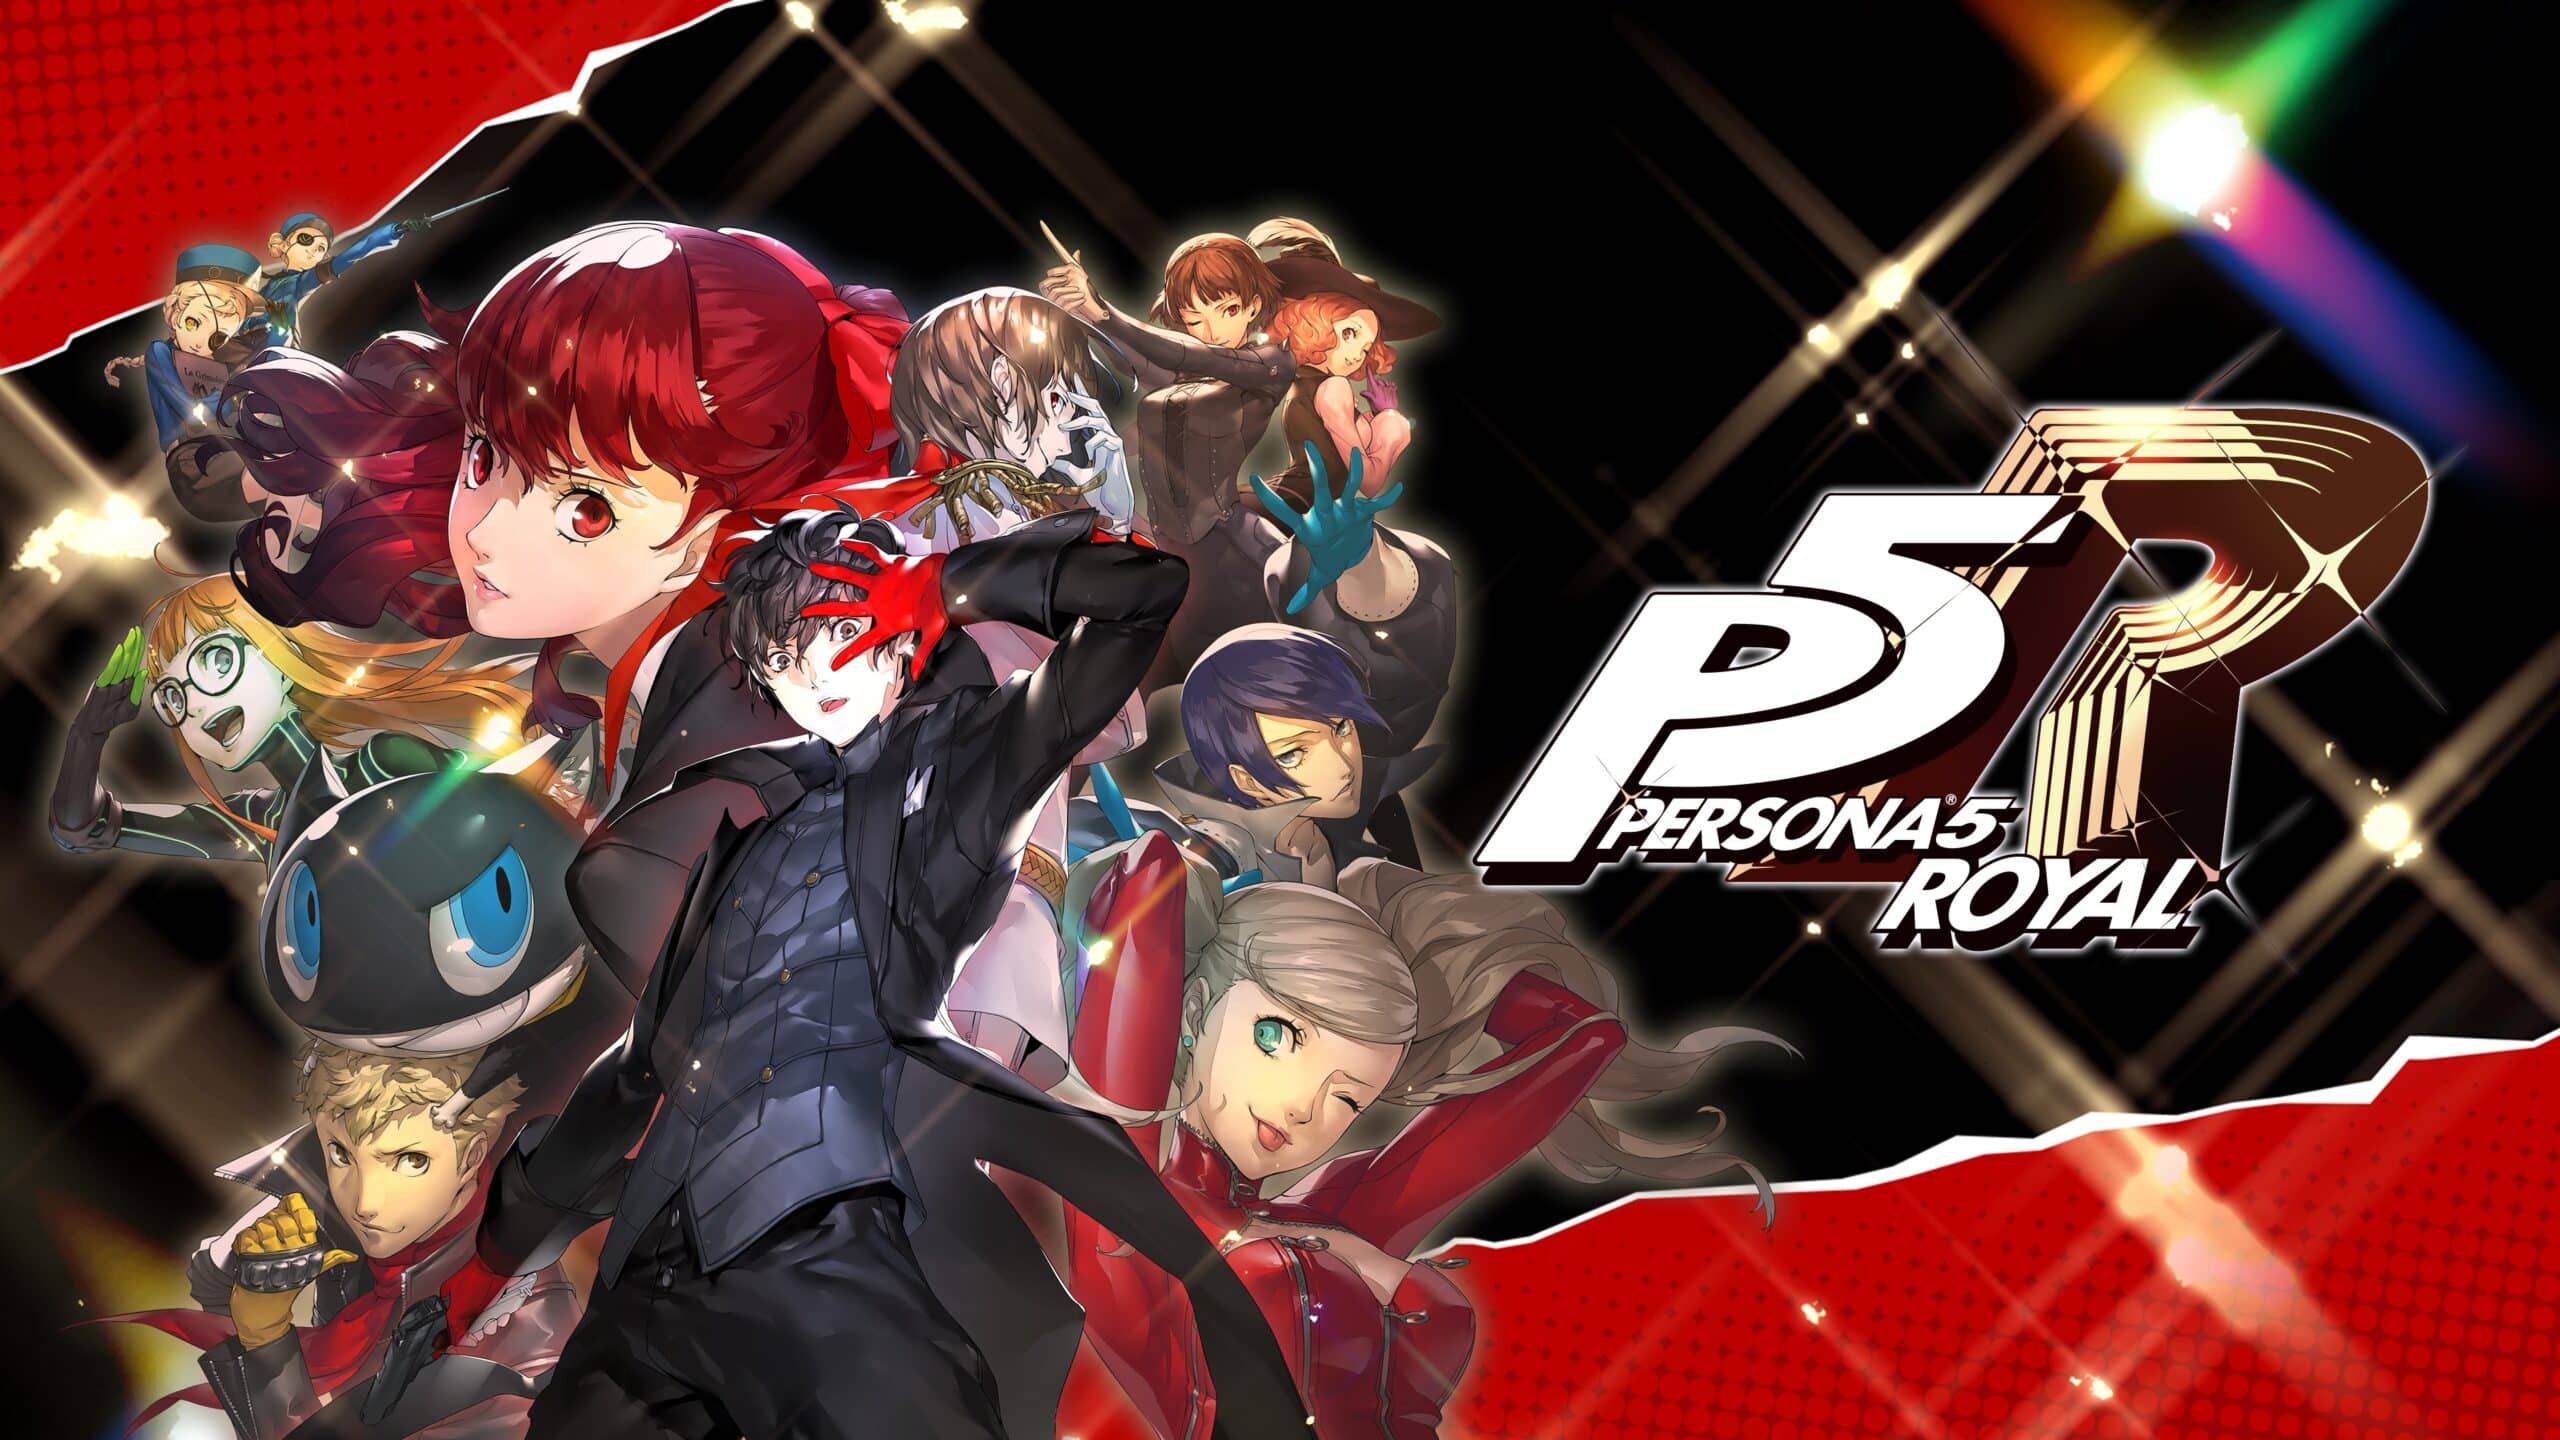 Persona 5 Royal Key Art featuring various characters from the game